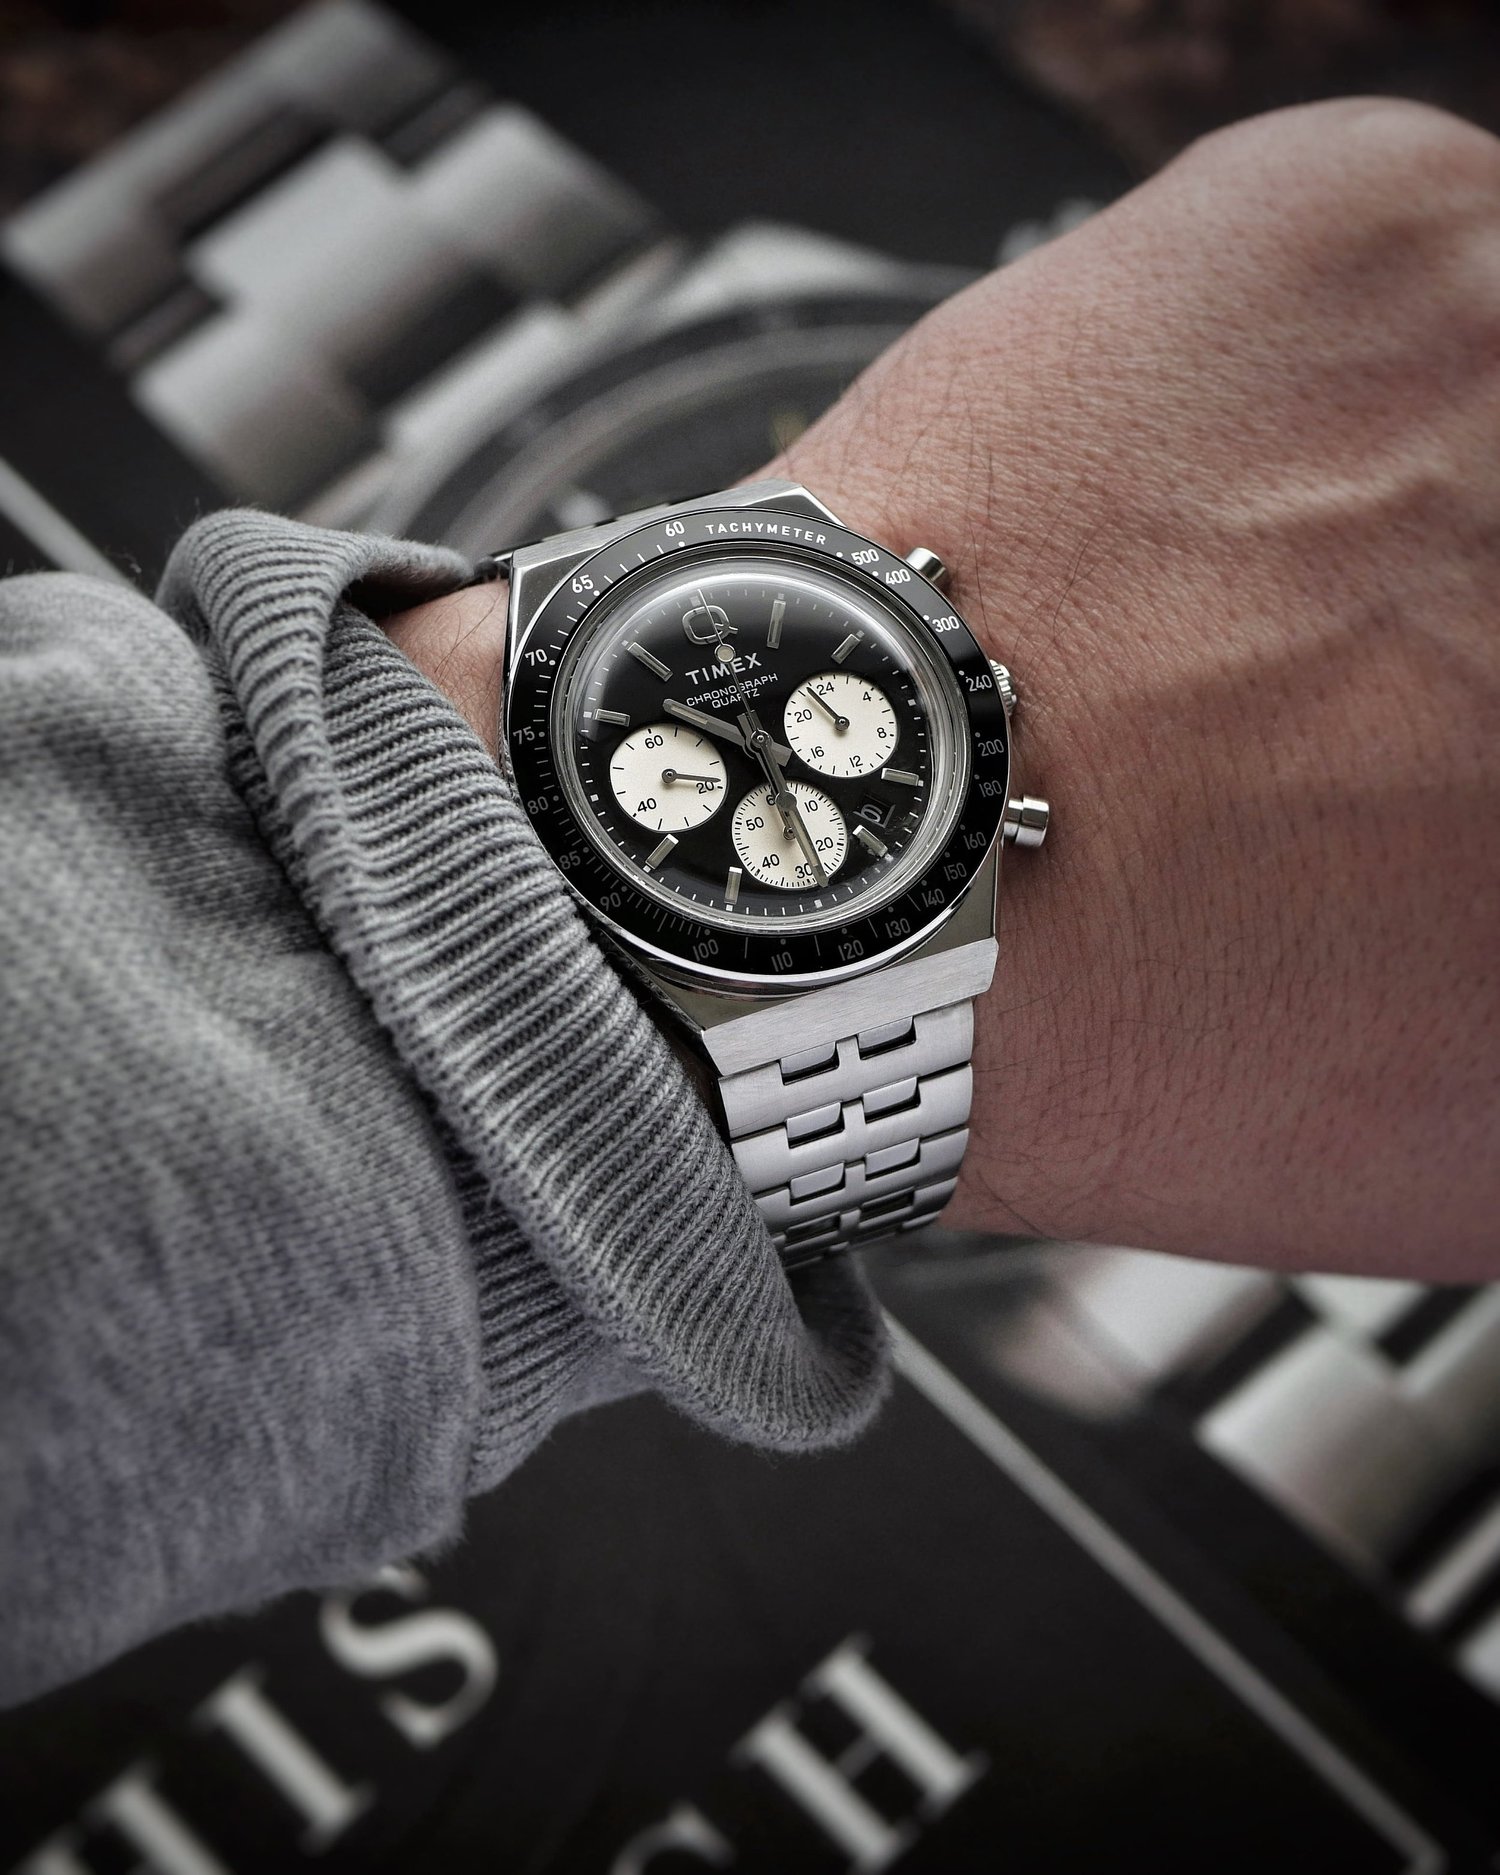 Hands-On Review: Timex Q Chronograph - A Stylish and Affordable ...